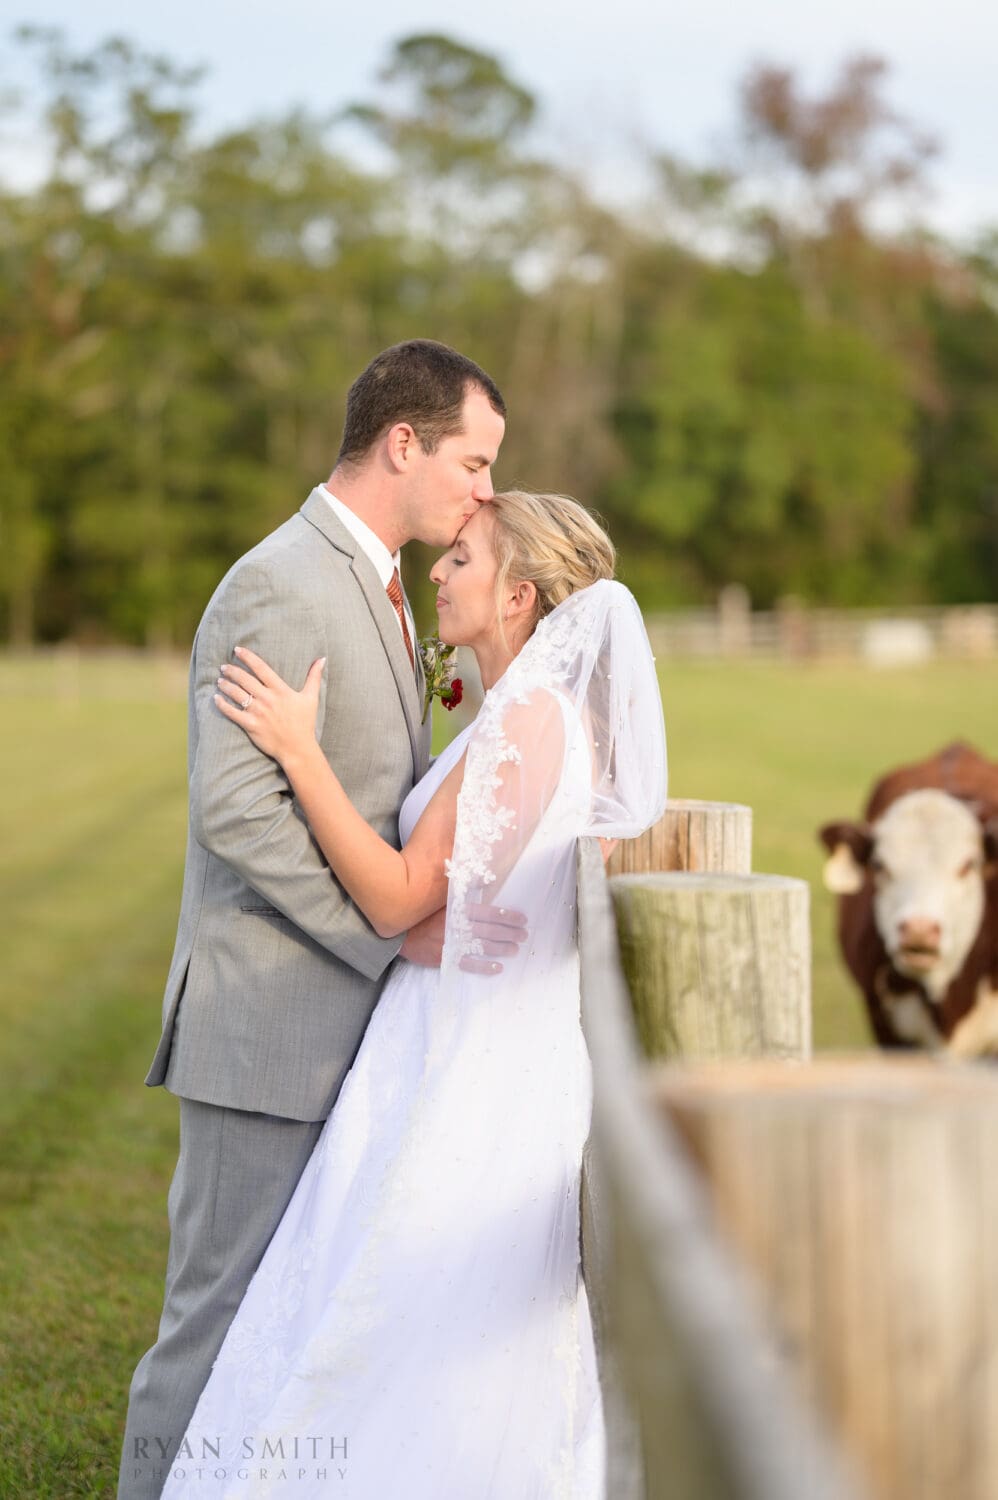 Bride and groom pictures by the farm animals - The Blessed Barn